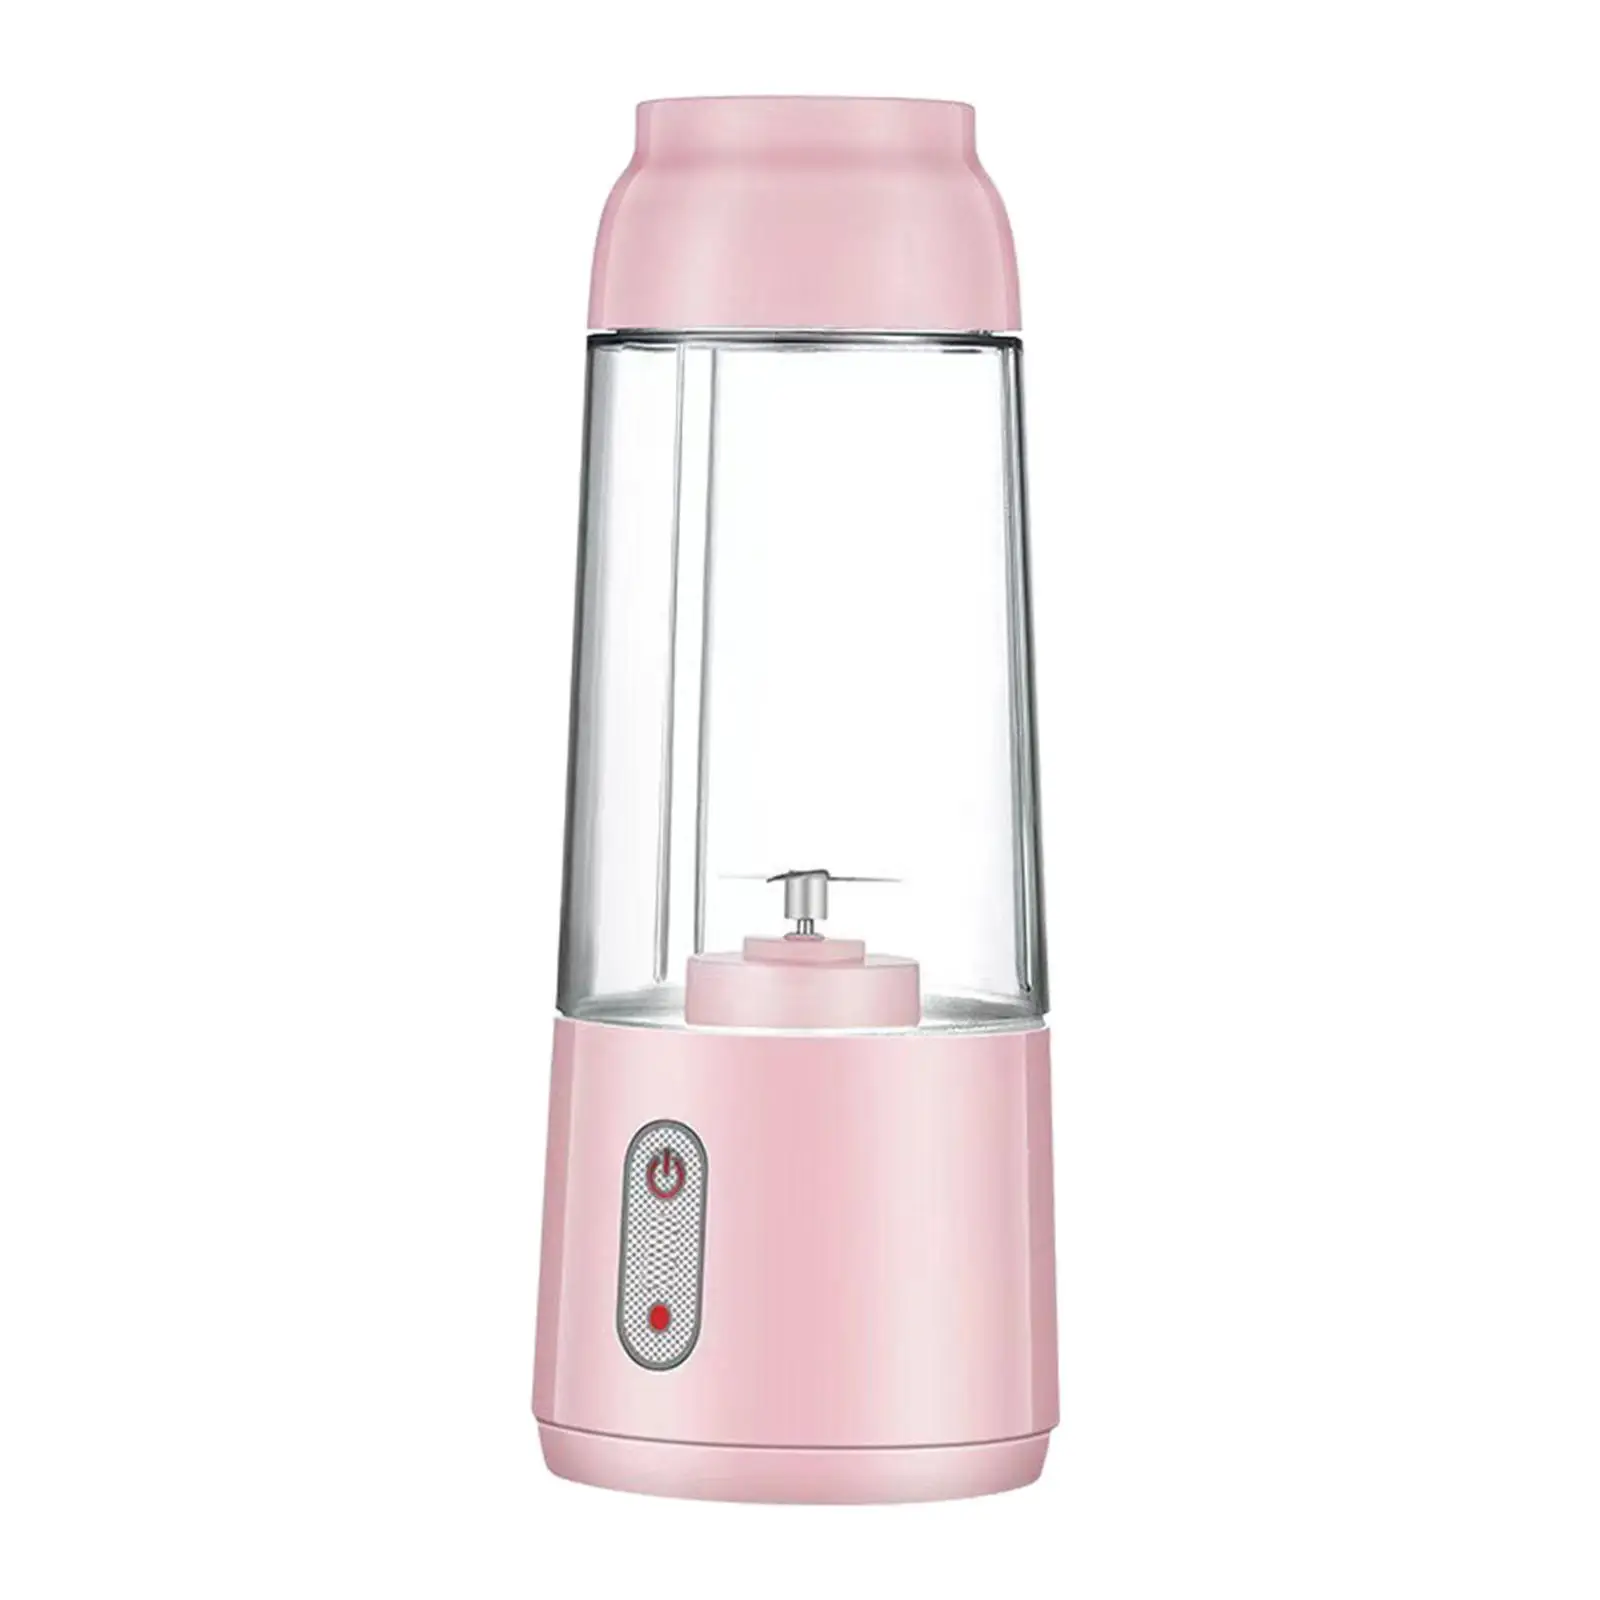 Personal 4 blade Mini Juicer Cup Extractor Smoothies Mixer USB Charging Portable Blender fruit 300ml Powerful Motor